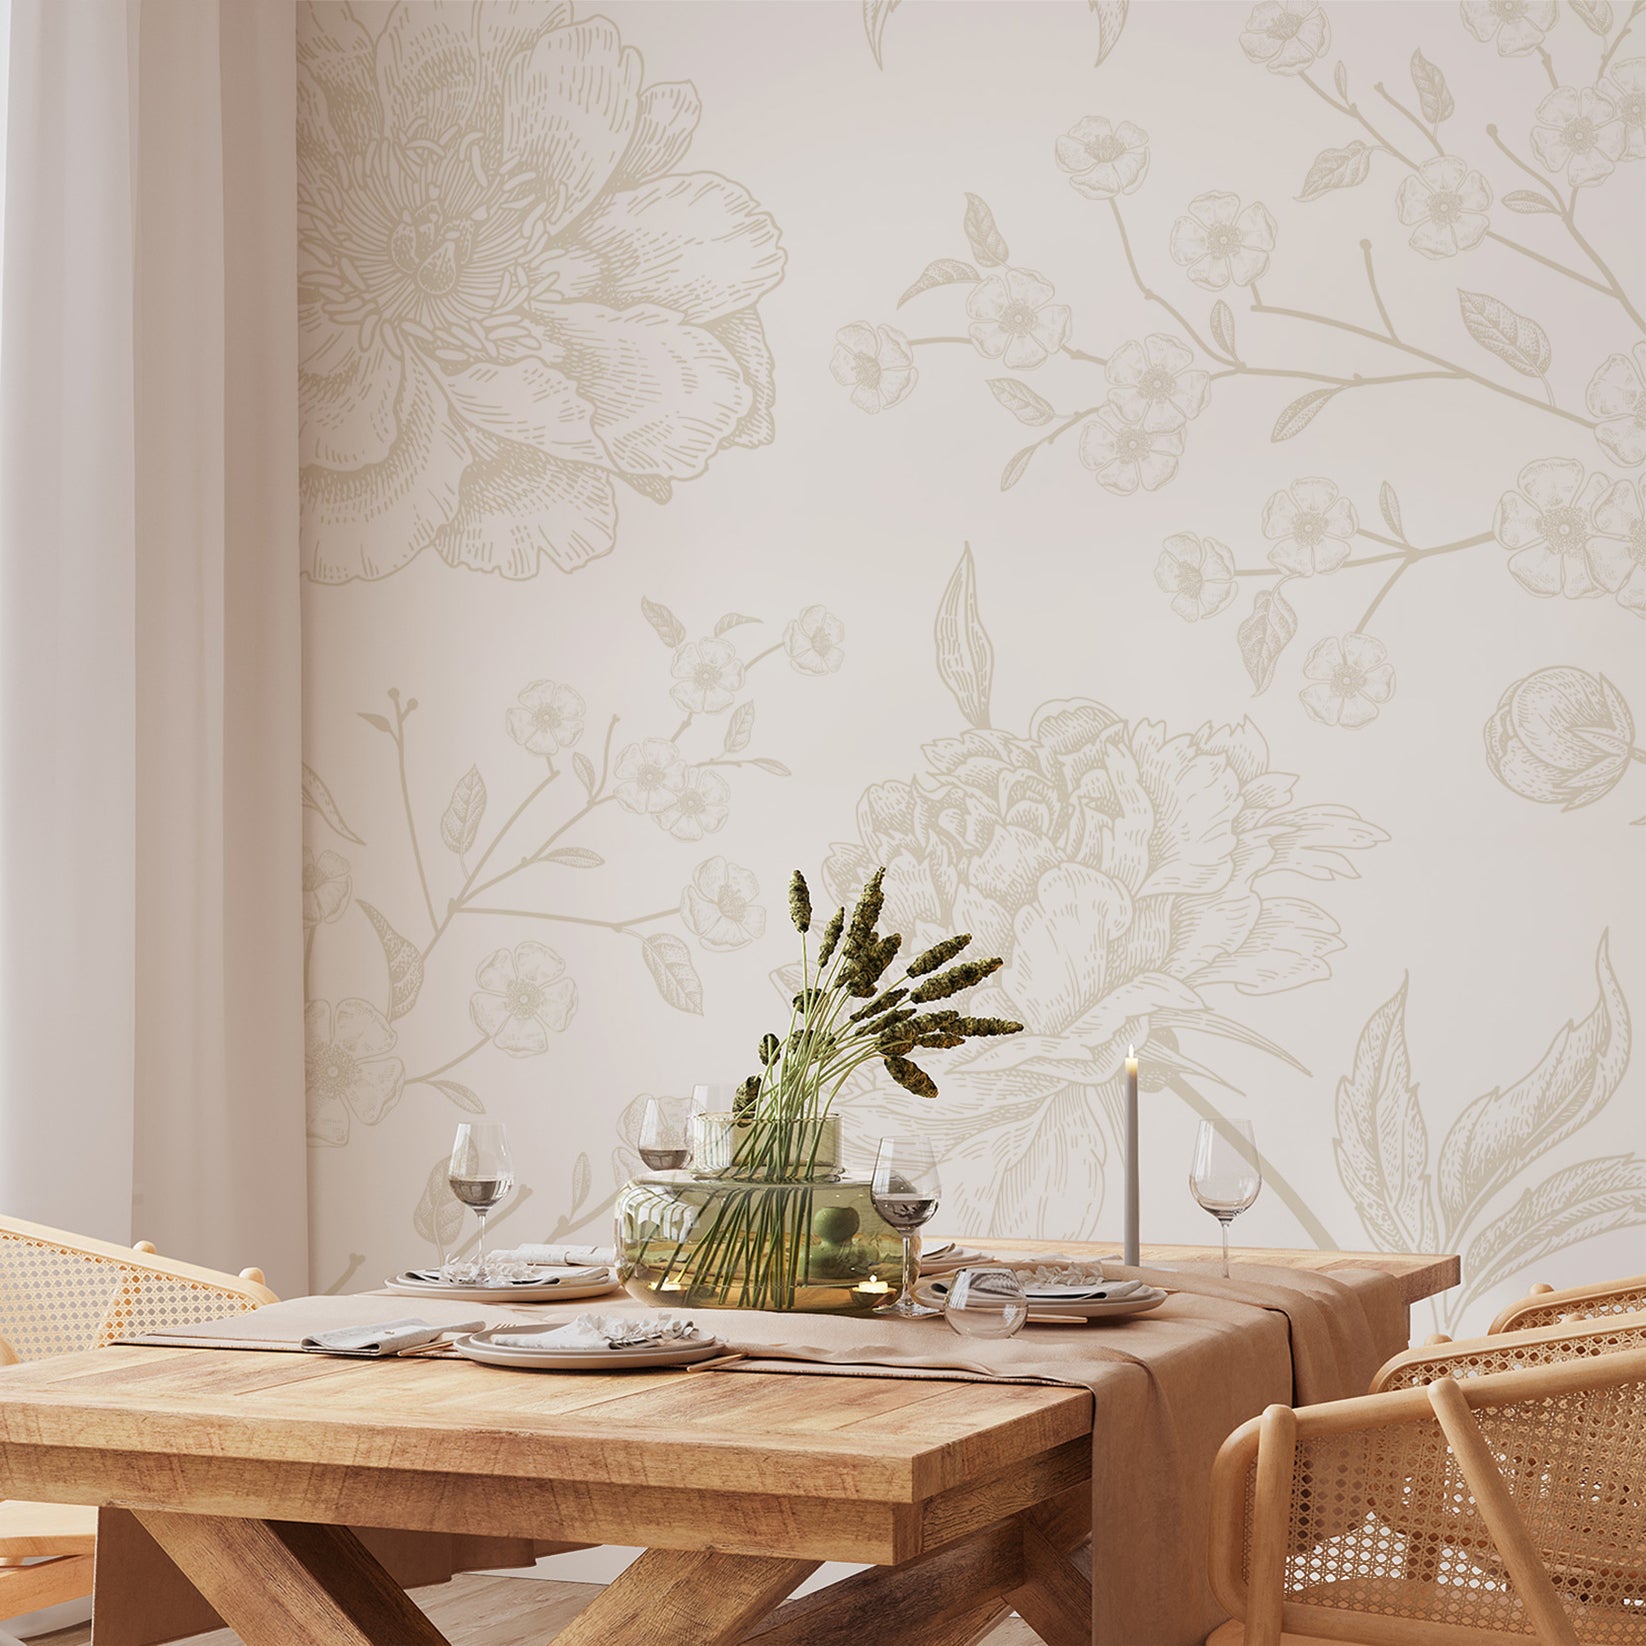 Subtle Botany floral minimalistic wallpaper in dining room with wooden table and chairs